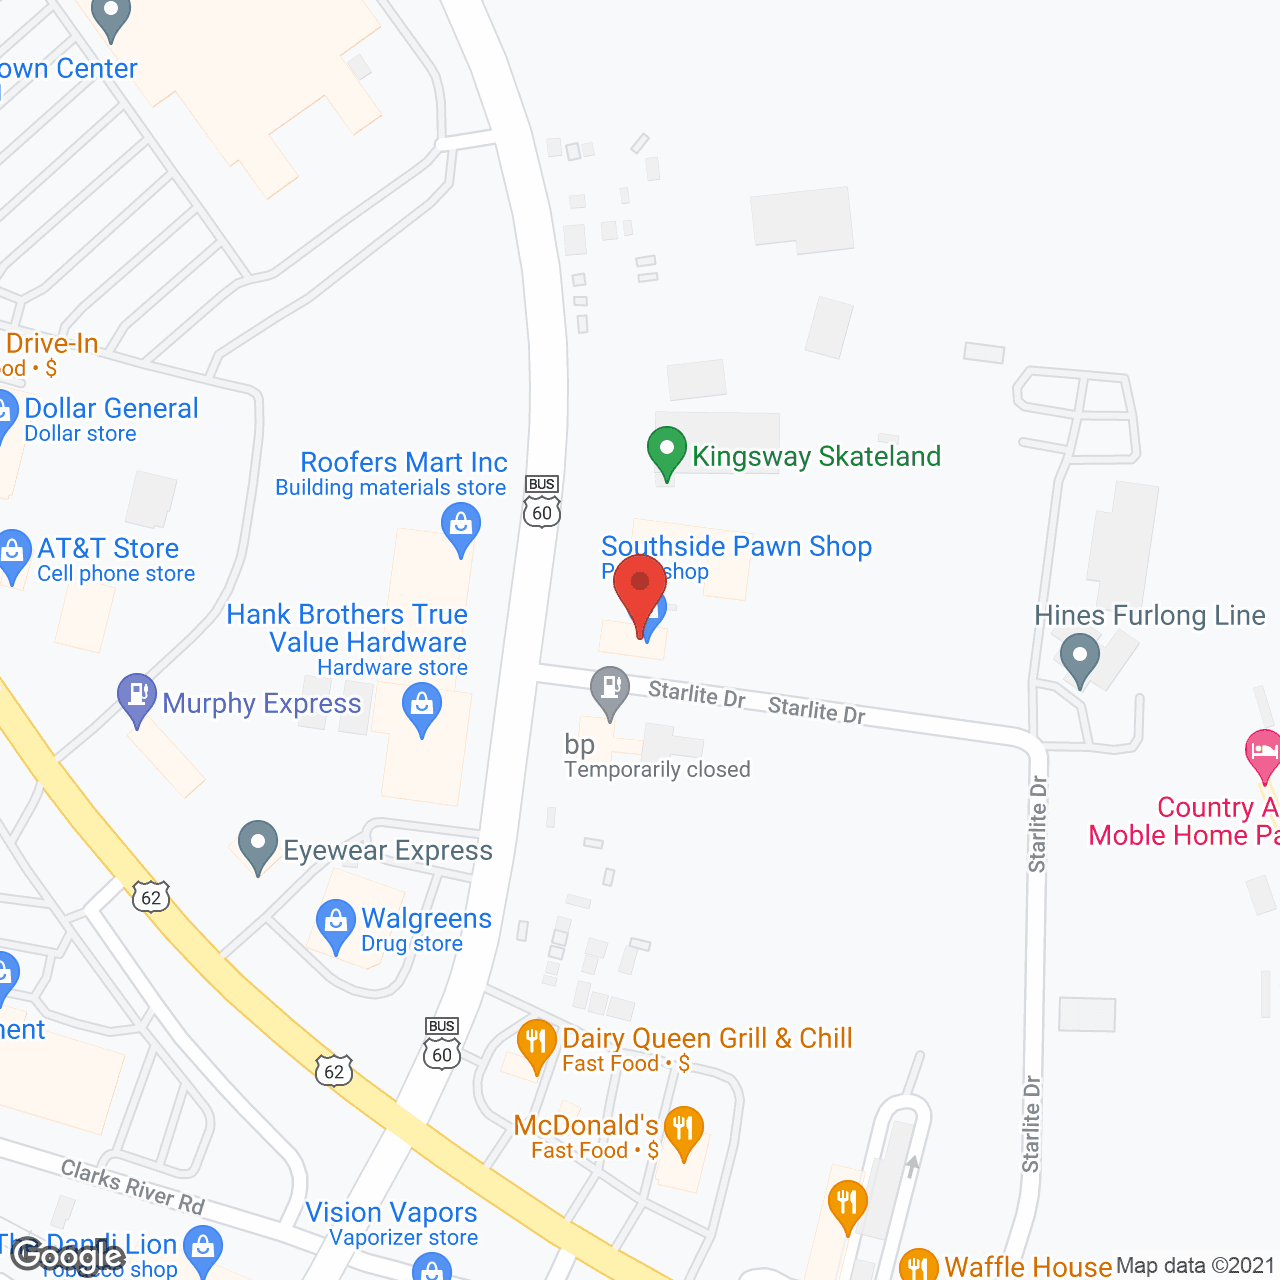 Corner Home Care/Option Care in google map